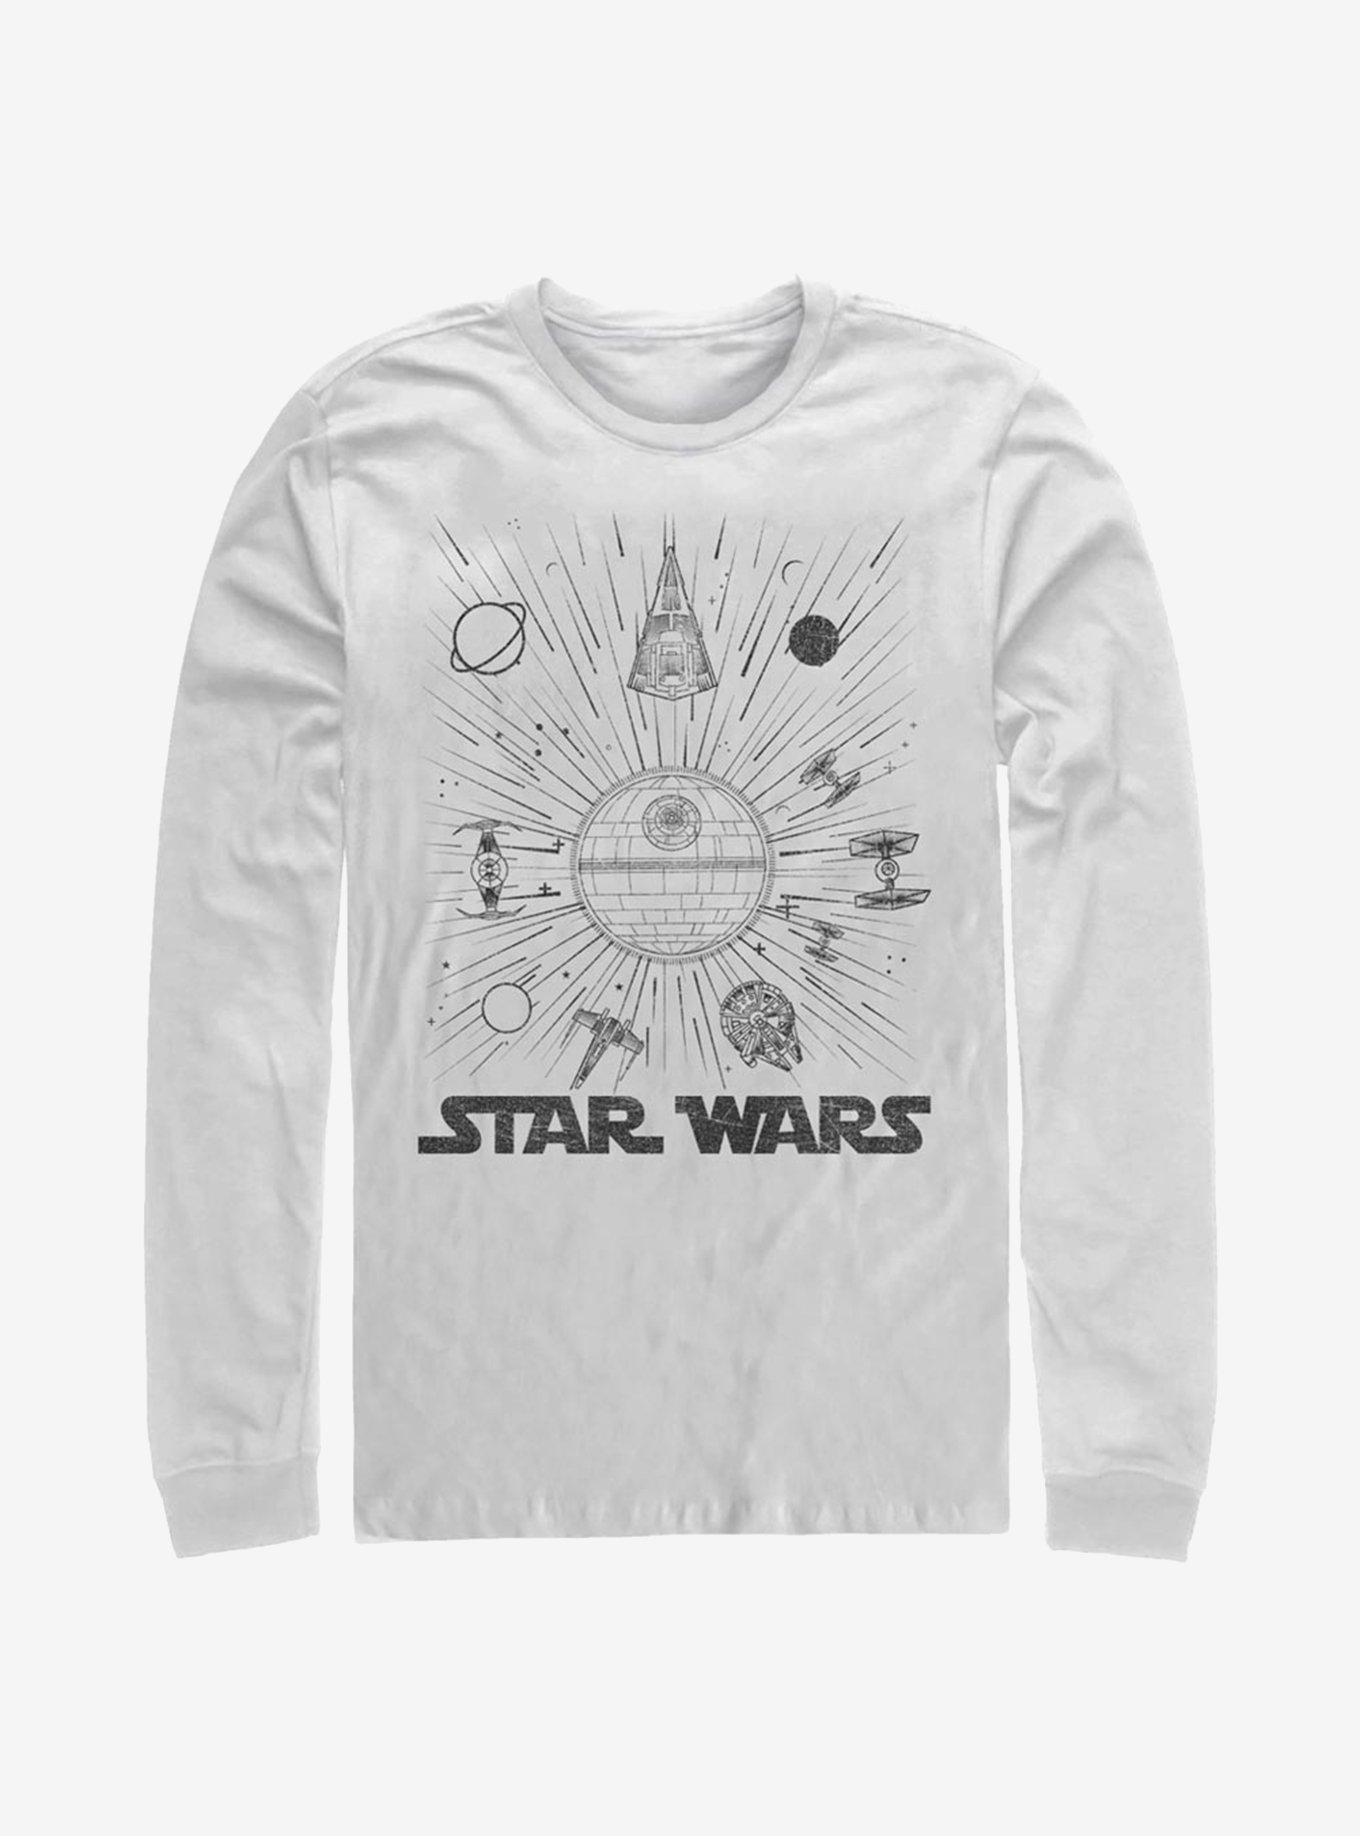 Star Wars Ships And Lines Burst Long-Sleeve T-Shirt, WHITE, hi-res